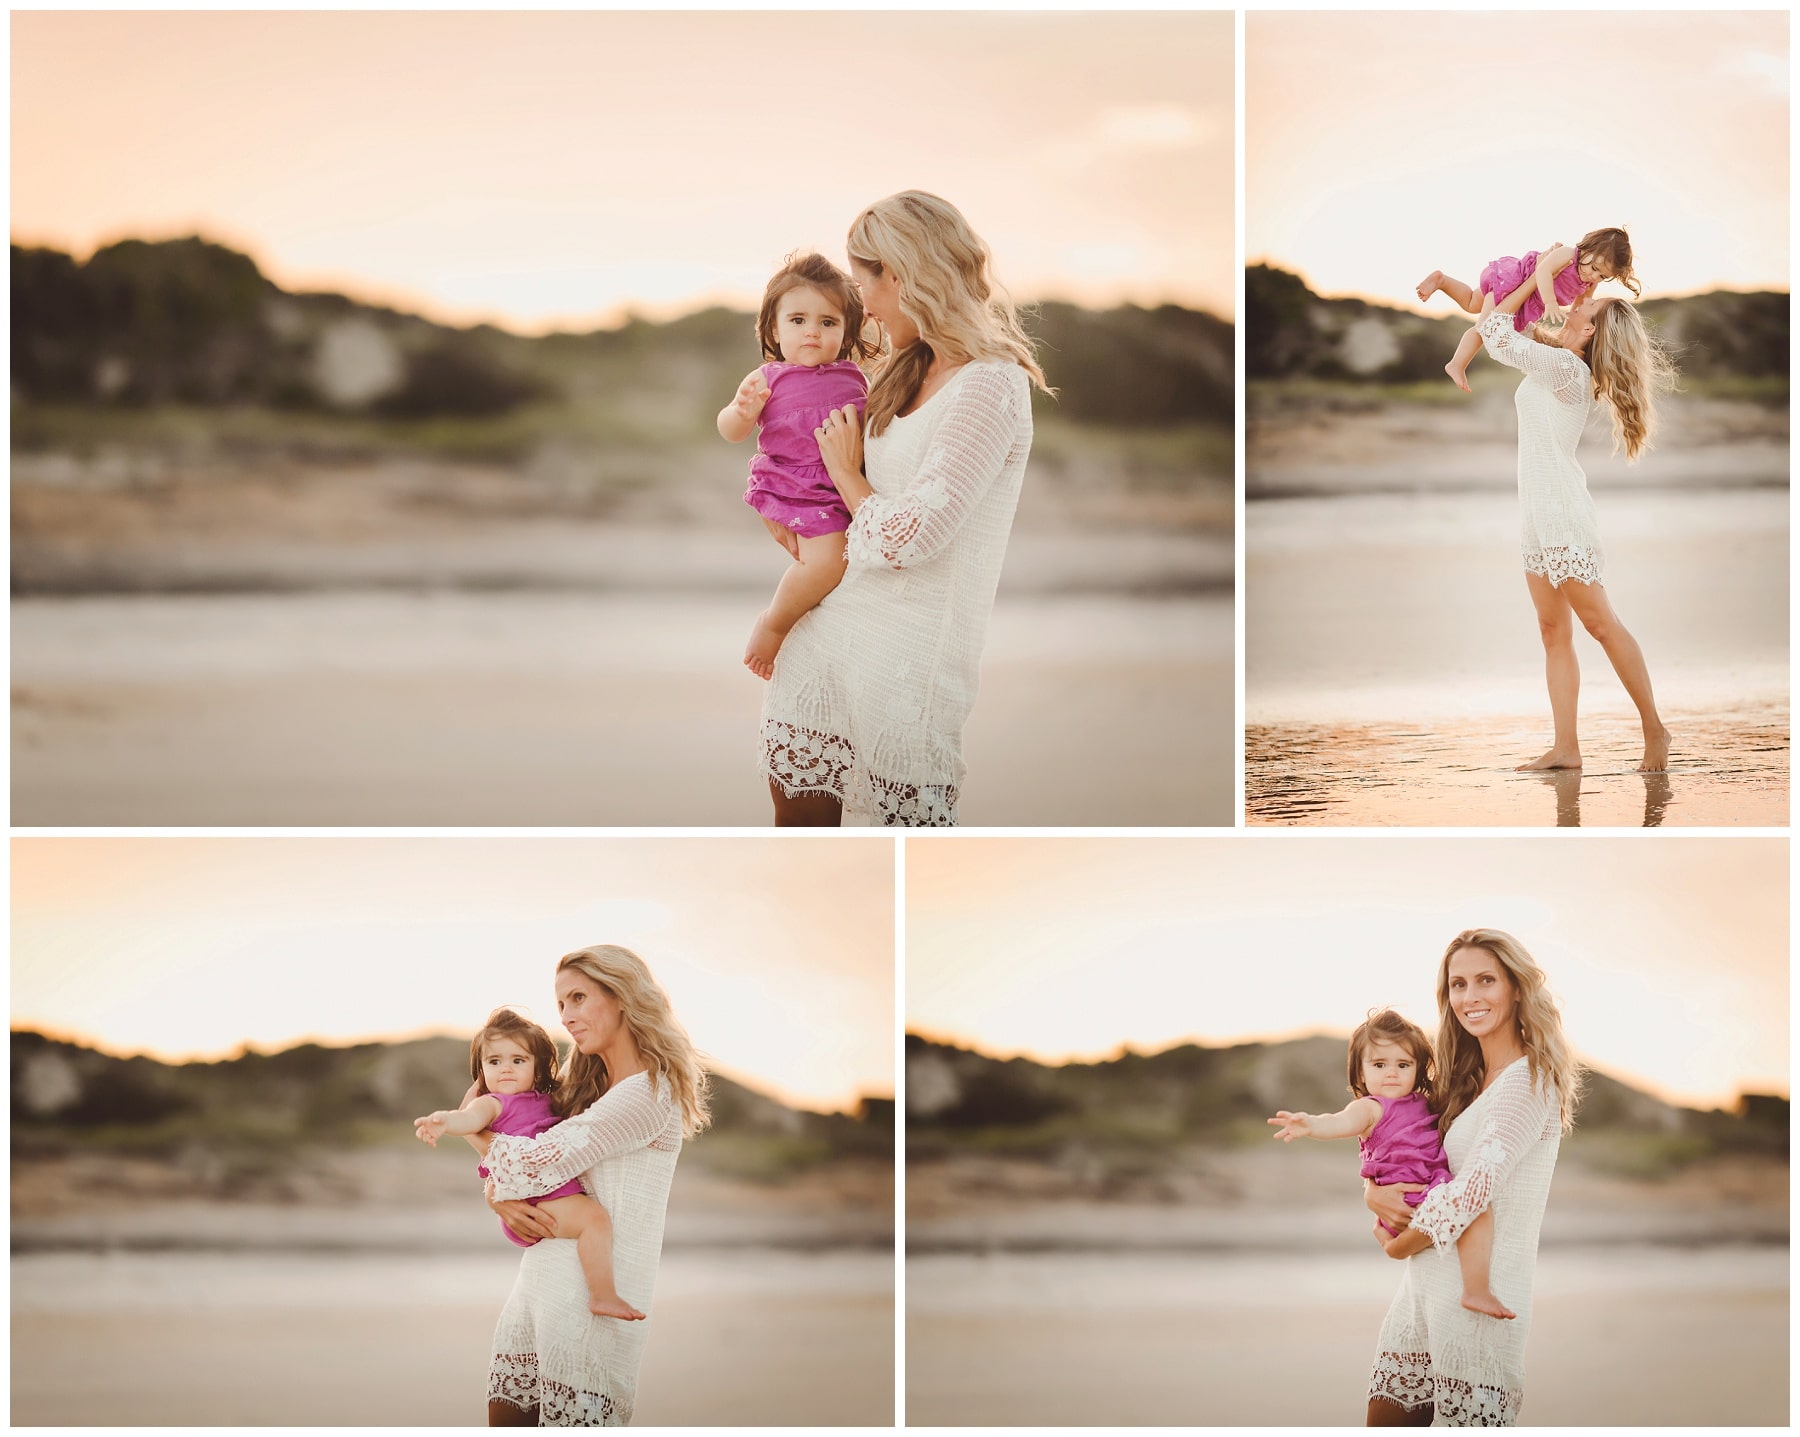 Mom and daughter at sunset on the beach www.808photographyjax.com